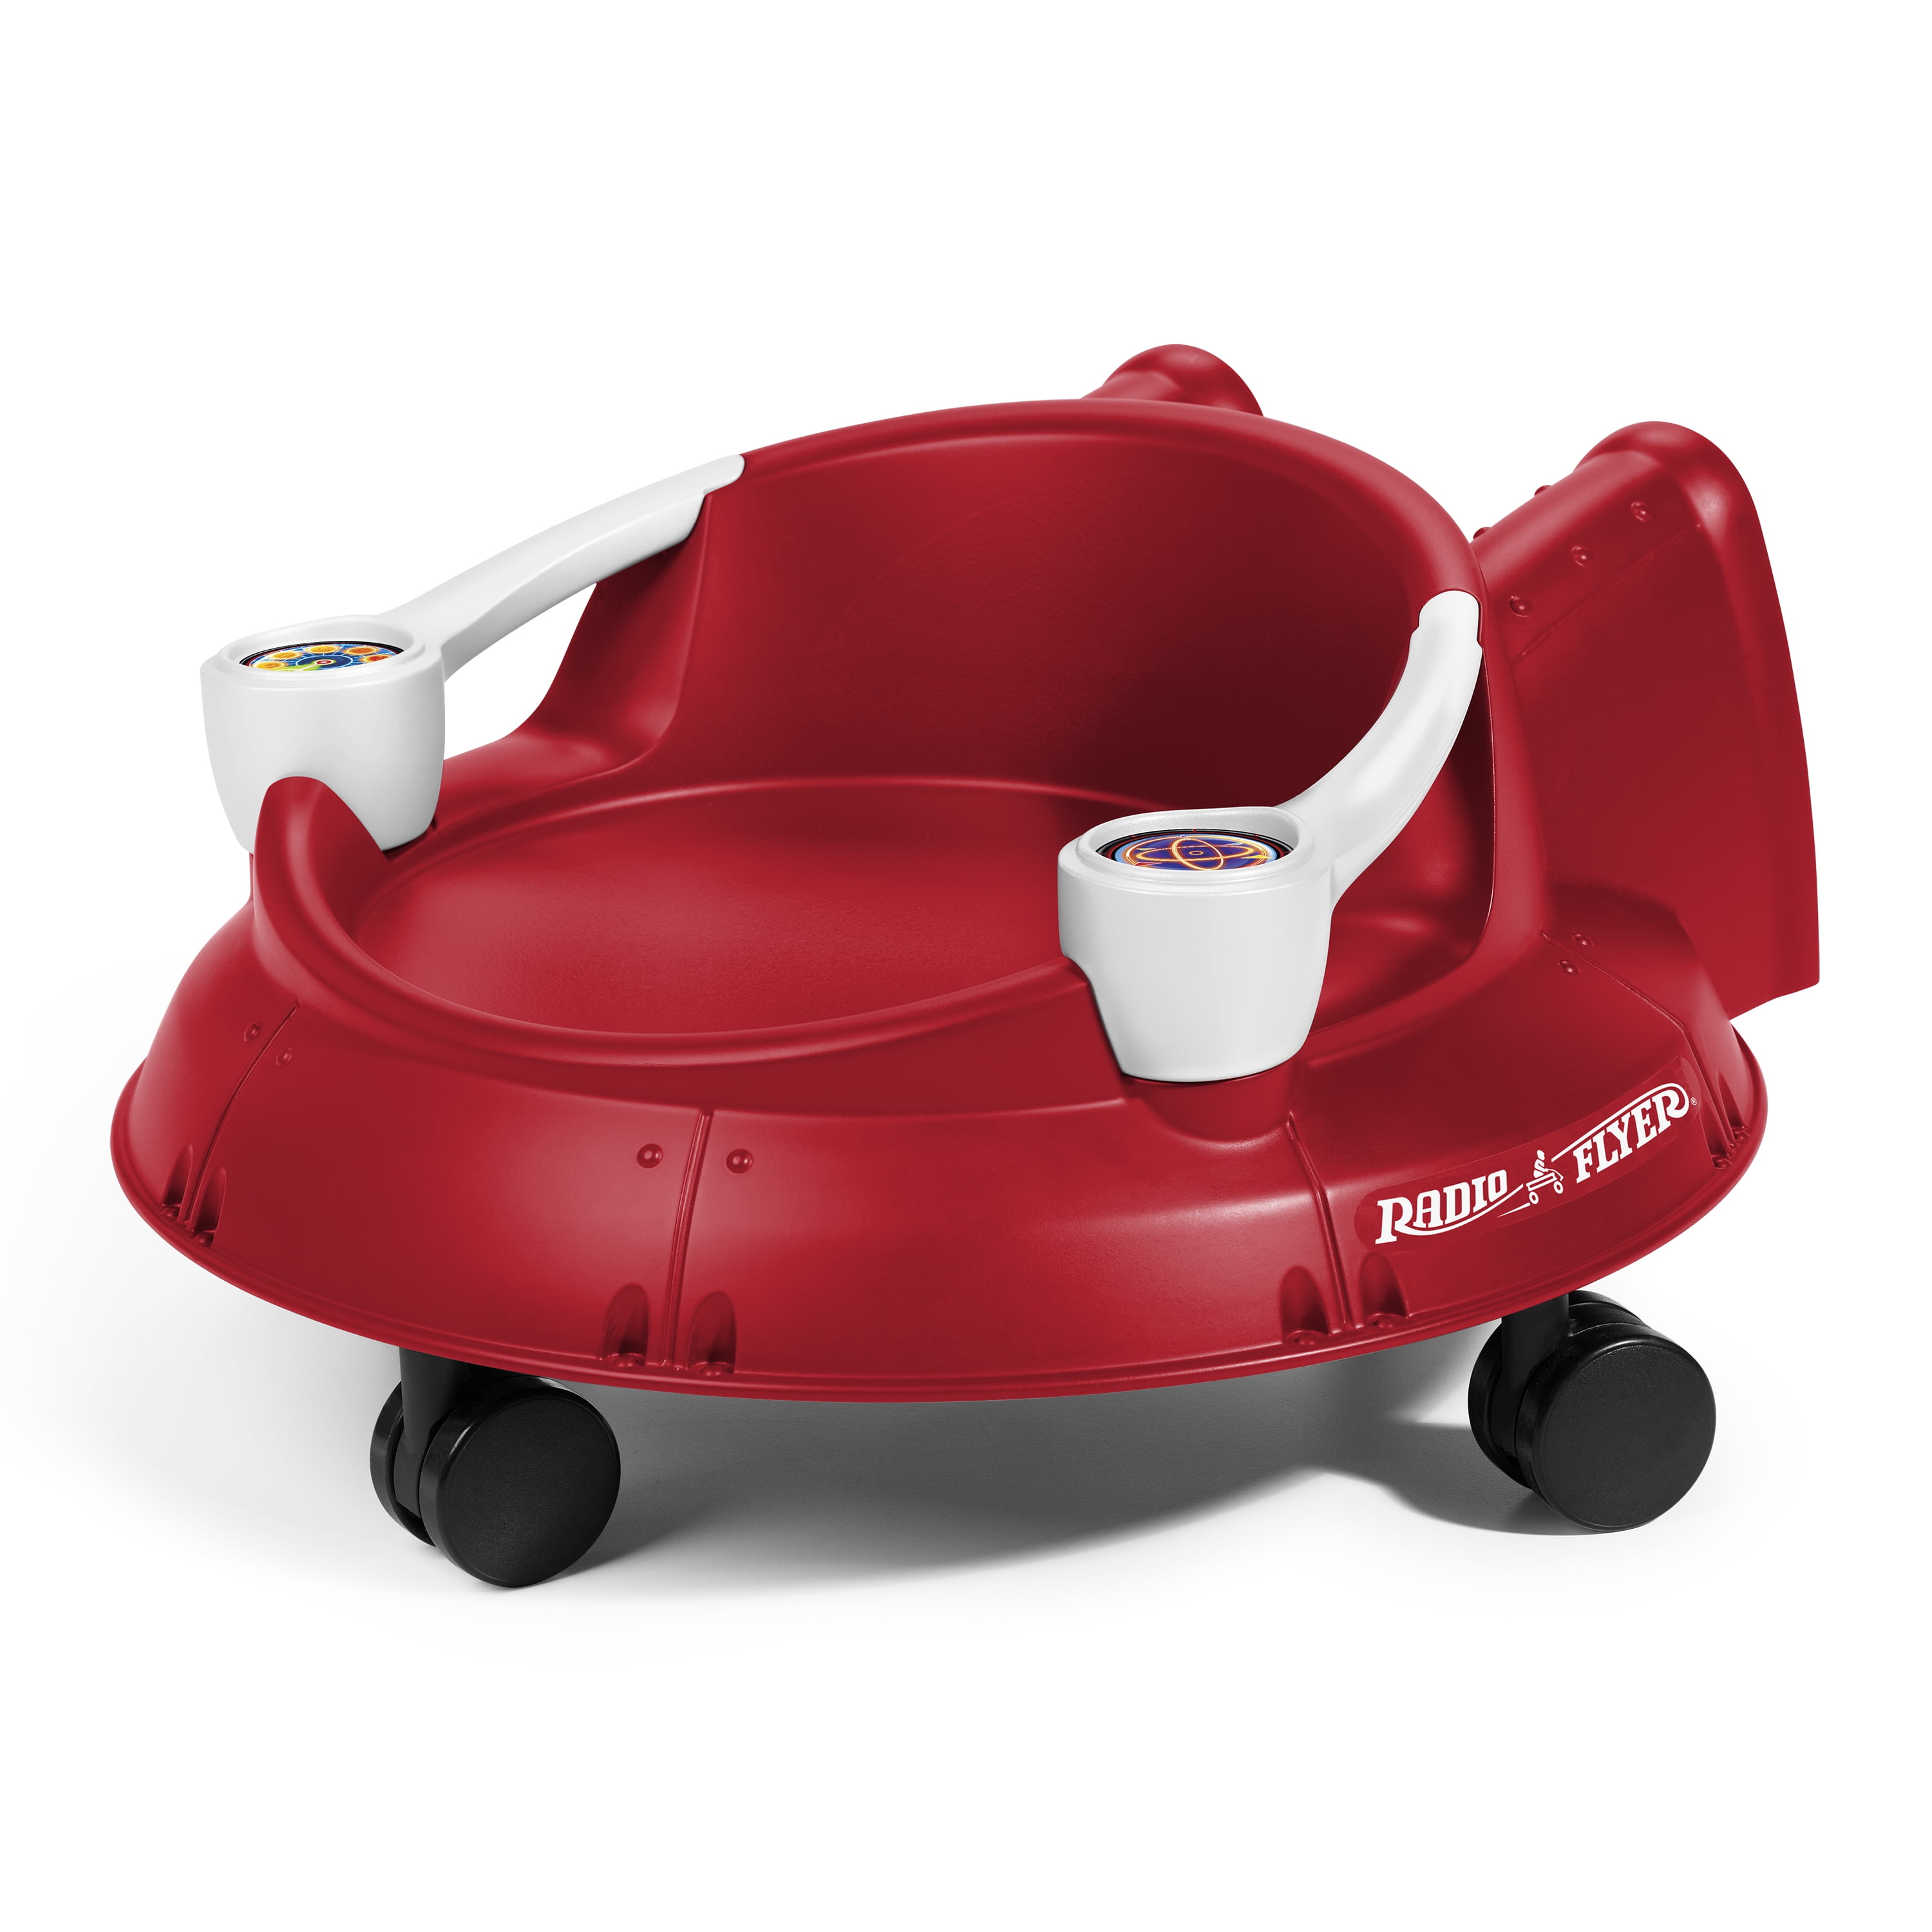 Radio Flyer, Spin 'N' Saucer, Caster Ride-on for Kids, Red - 3